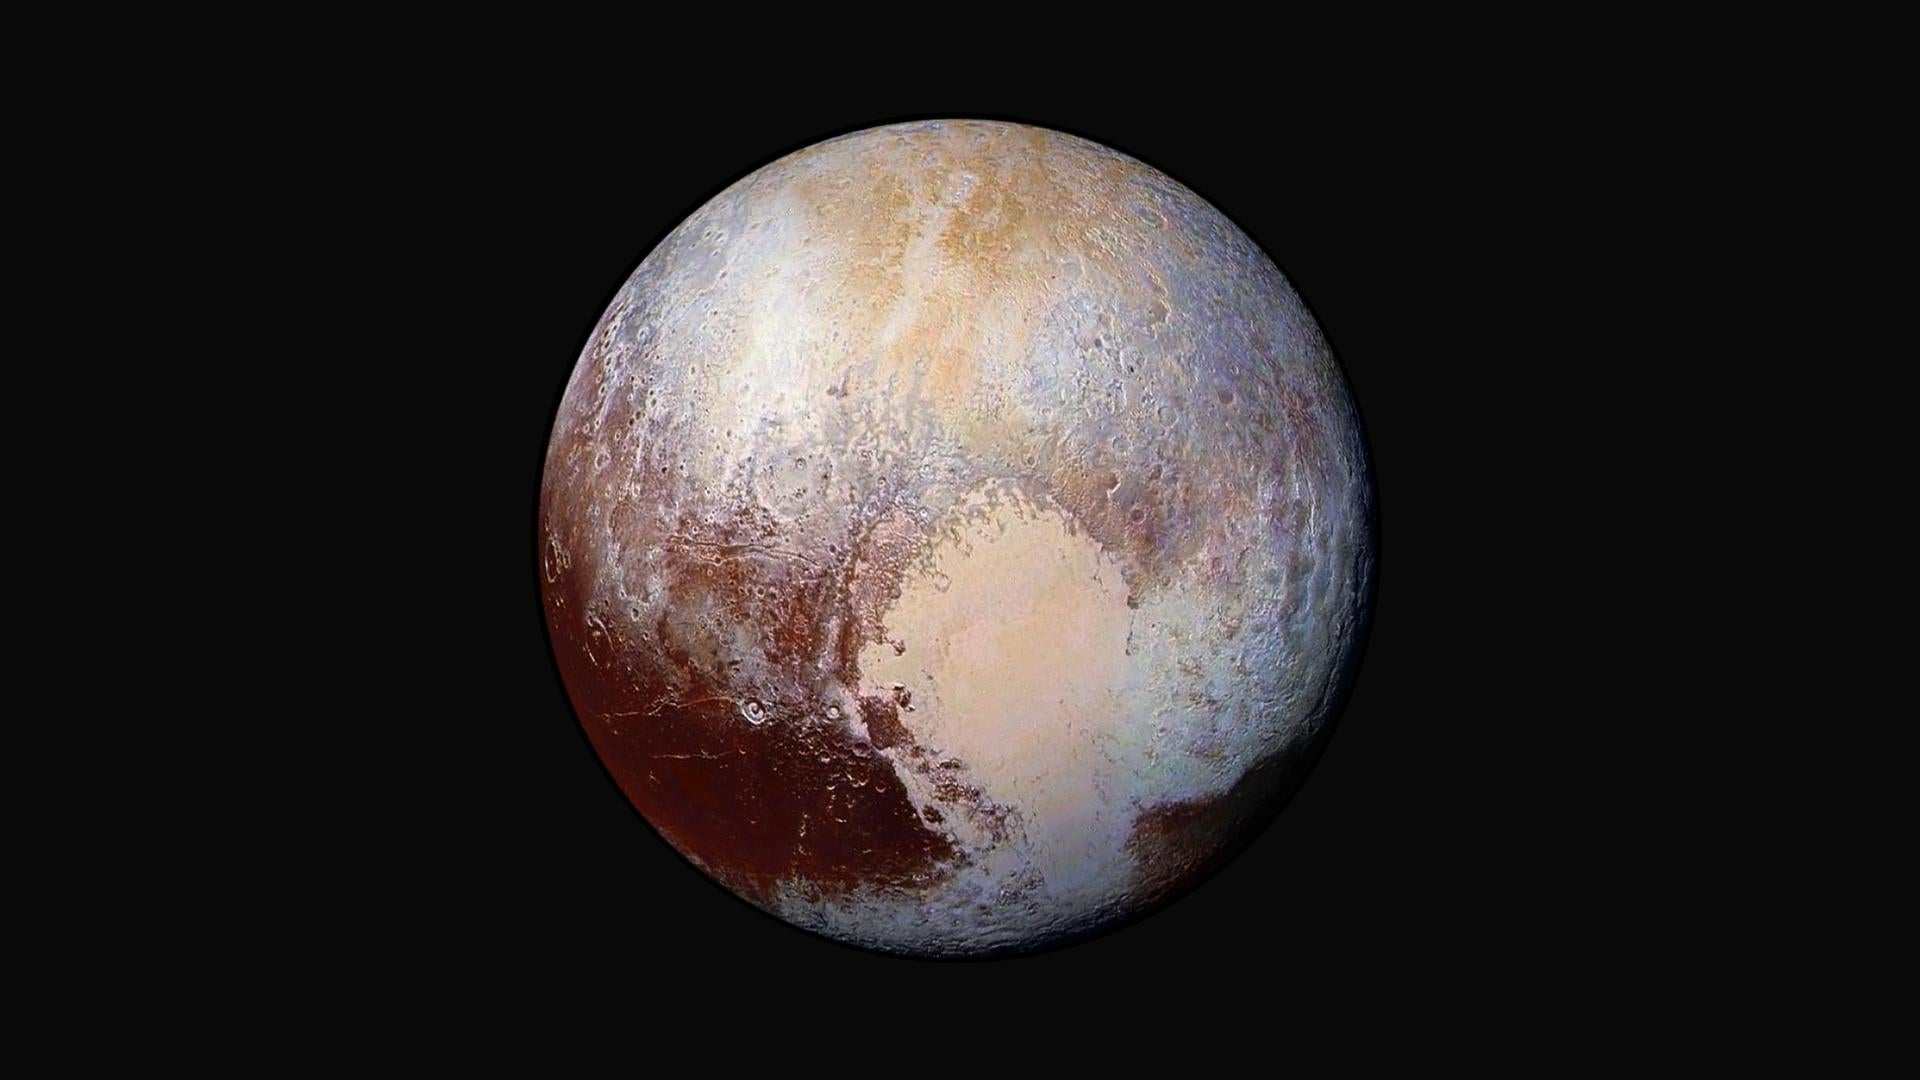 The Dwarf Planet Pluto as imaged by the New Horizons spacecraft in 2015